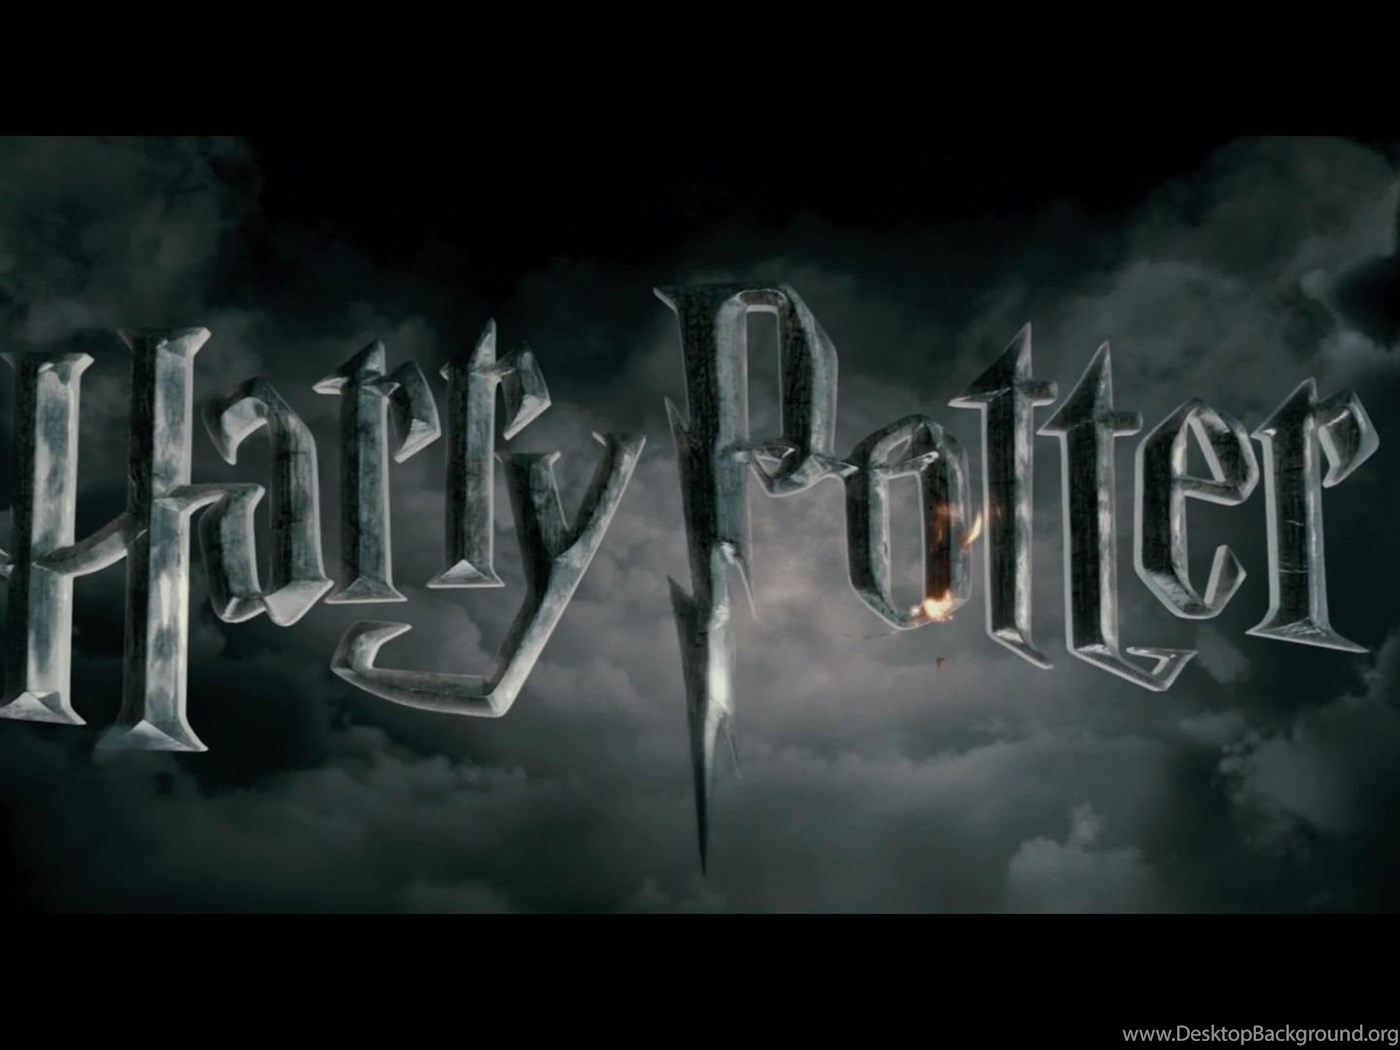 Harry potter battle after effects tutorial torrent illusion field anime sharing torrents